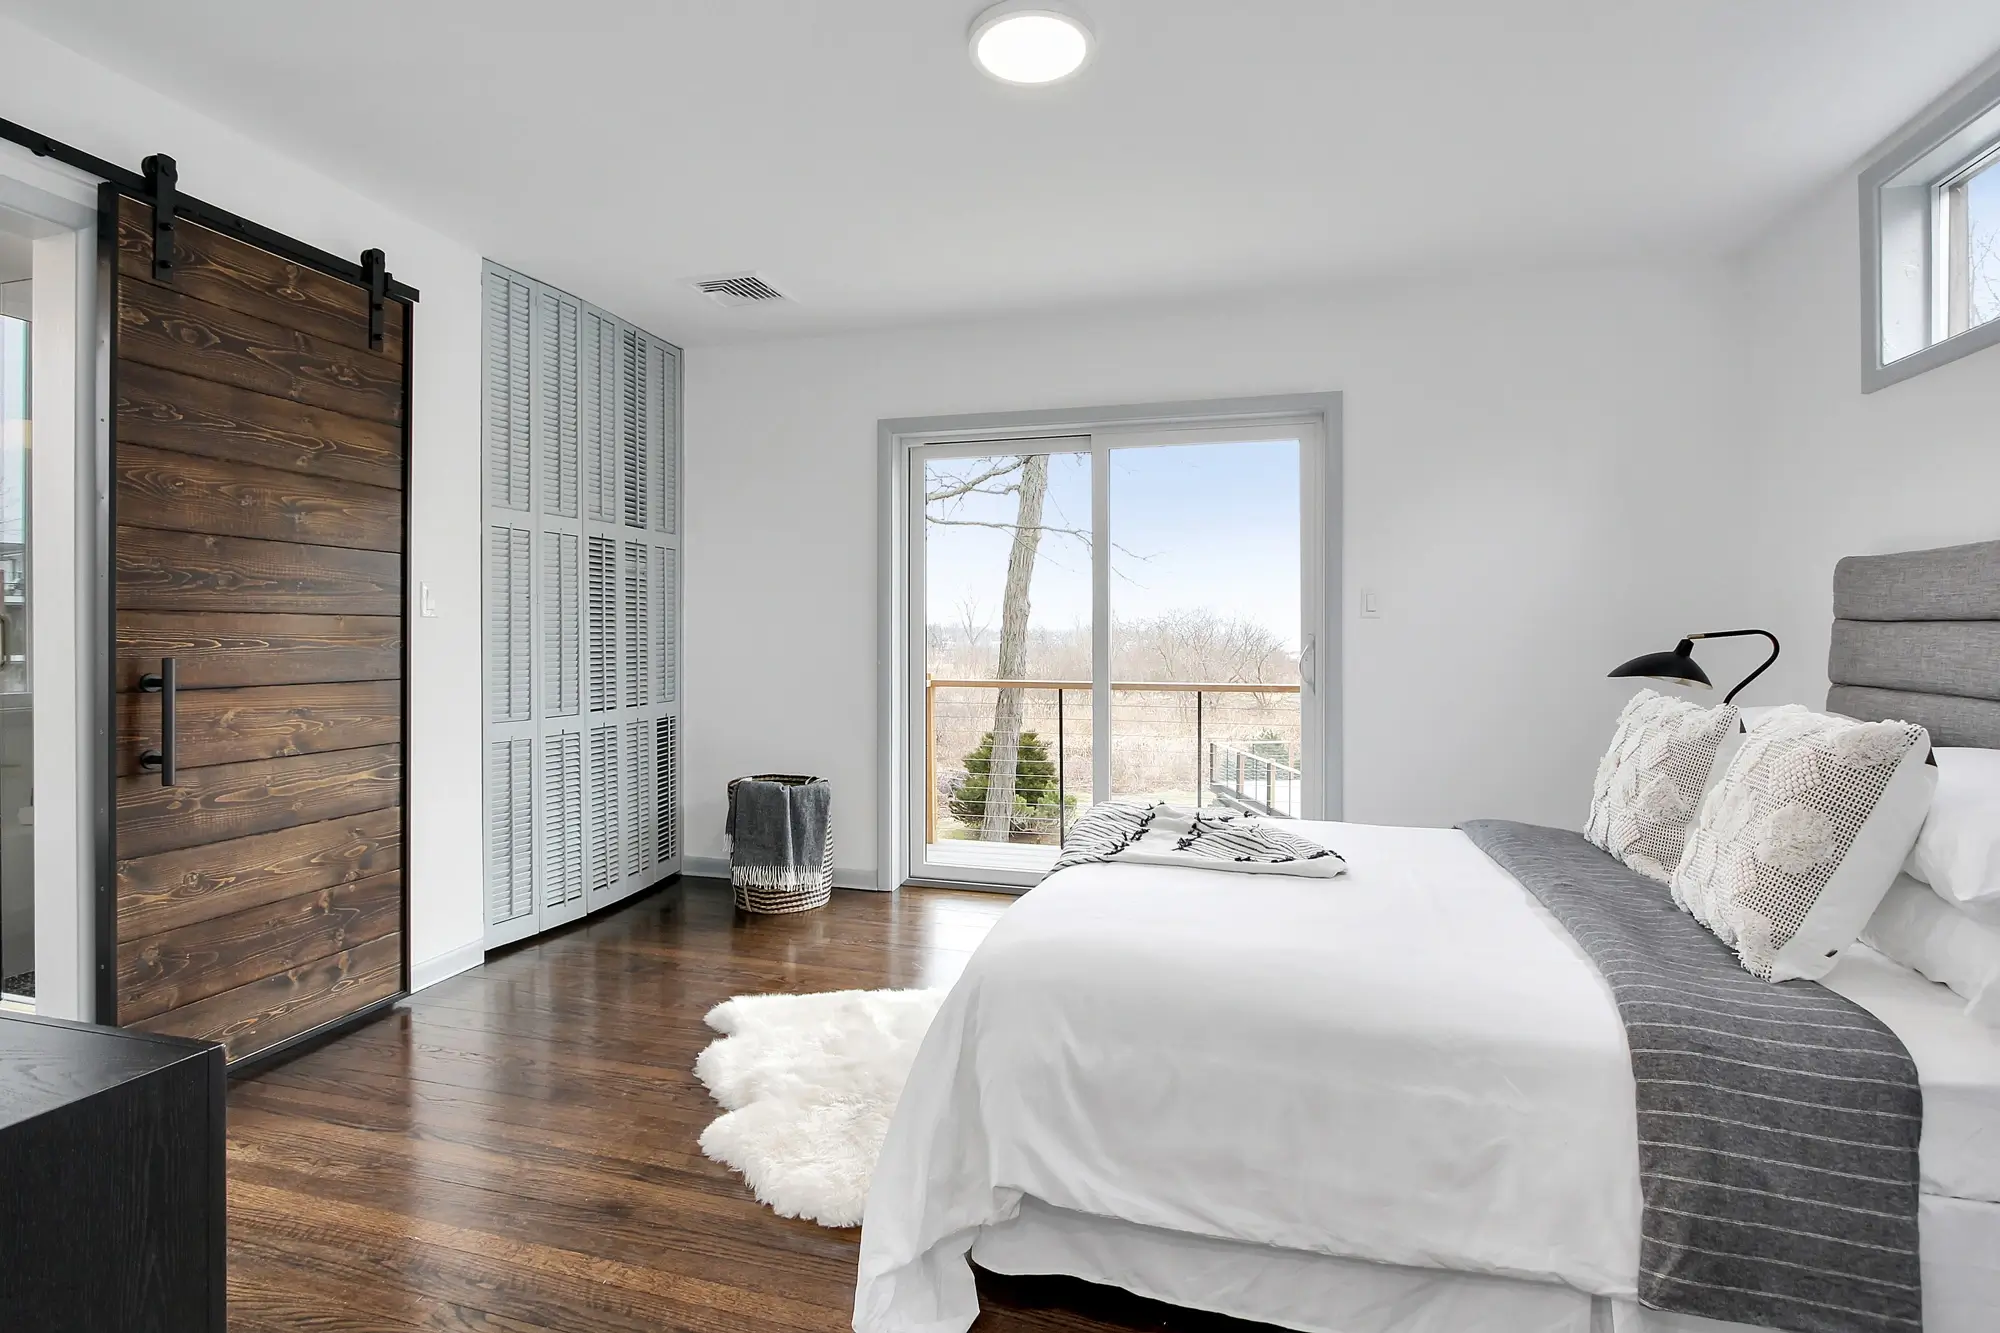 A room with a king size bed with pillows on top and comforter and a fluffy white rug on the floor and on the other side of the room there is a sliding door and outside the glass door you can see the beautiful scenery.